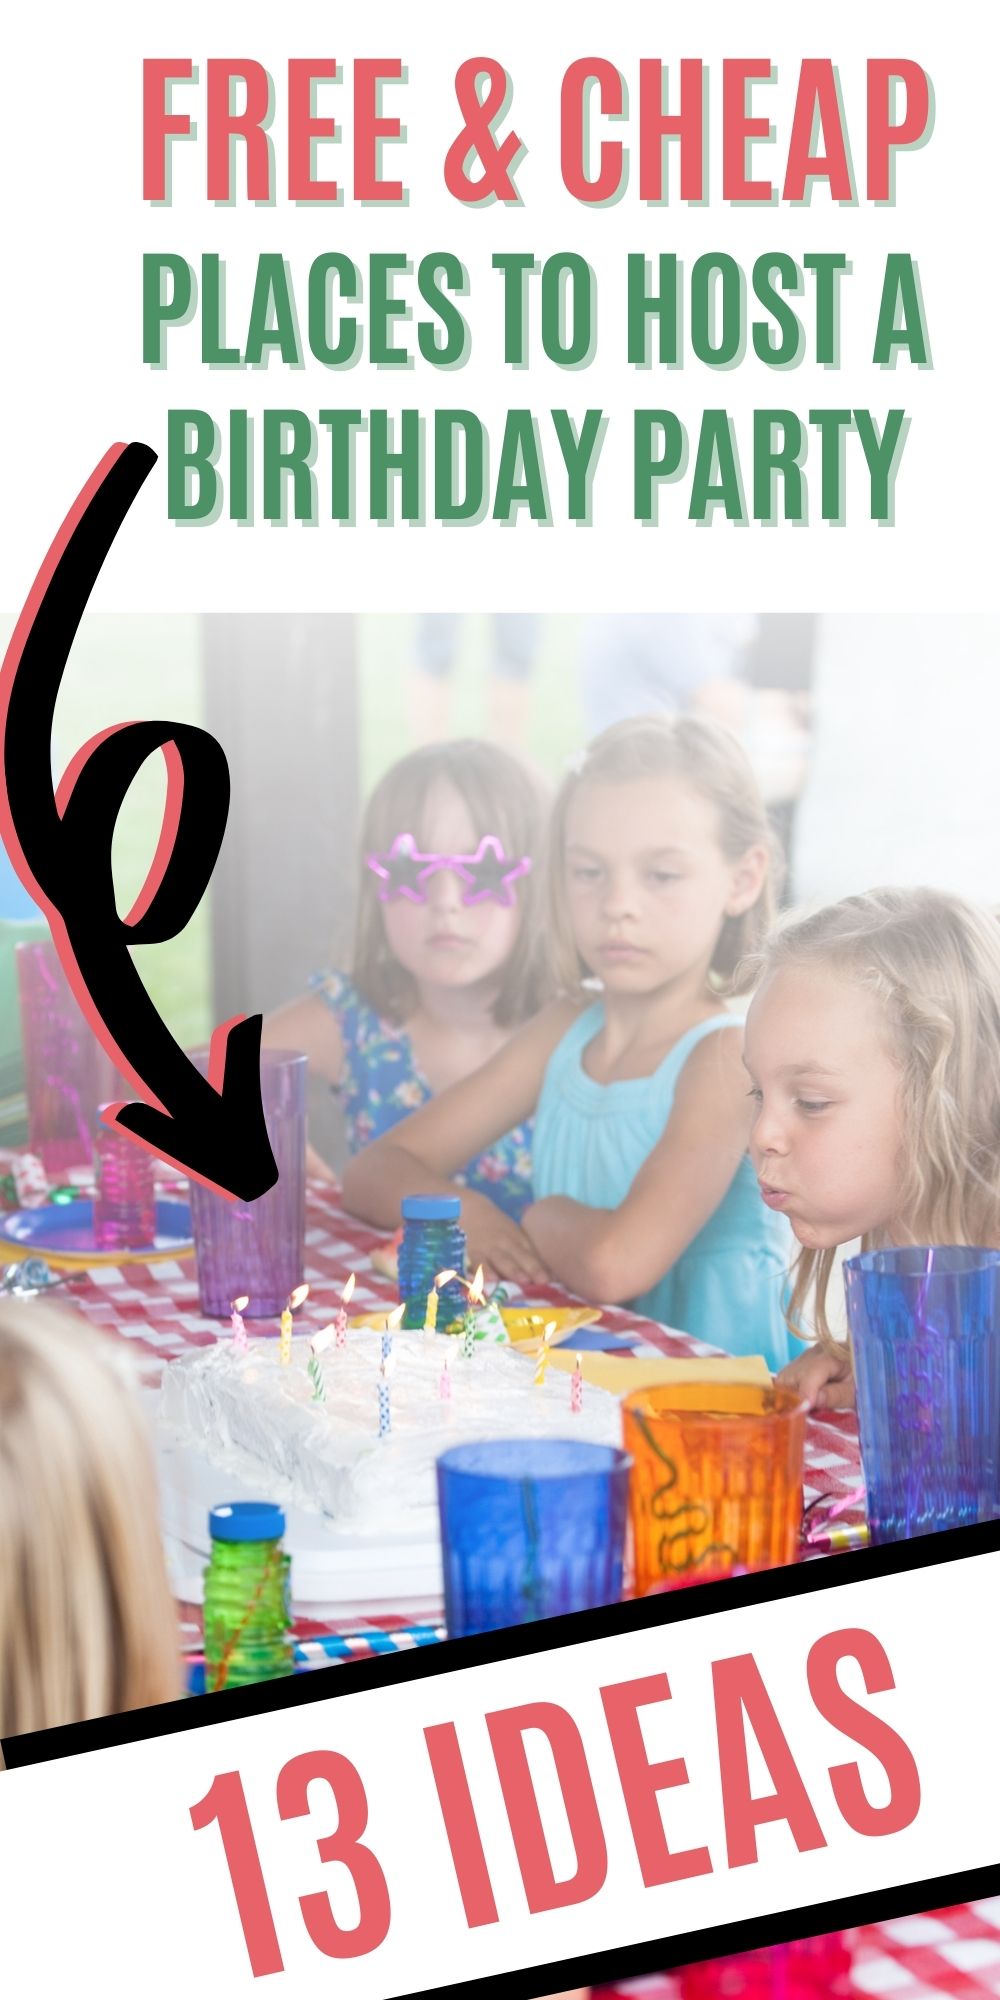 Cheap birthday party places